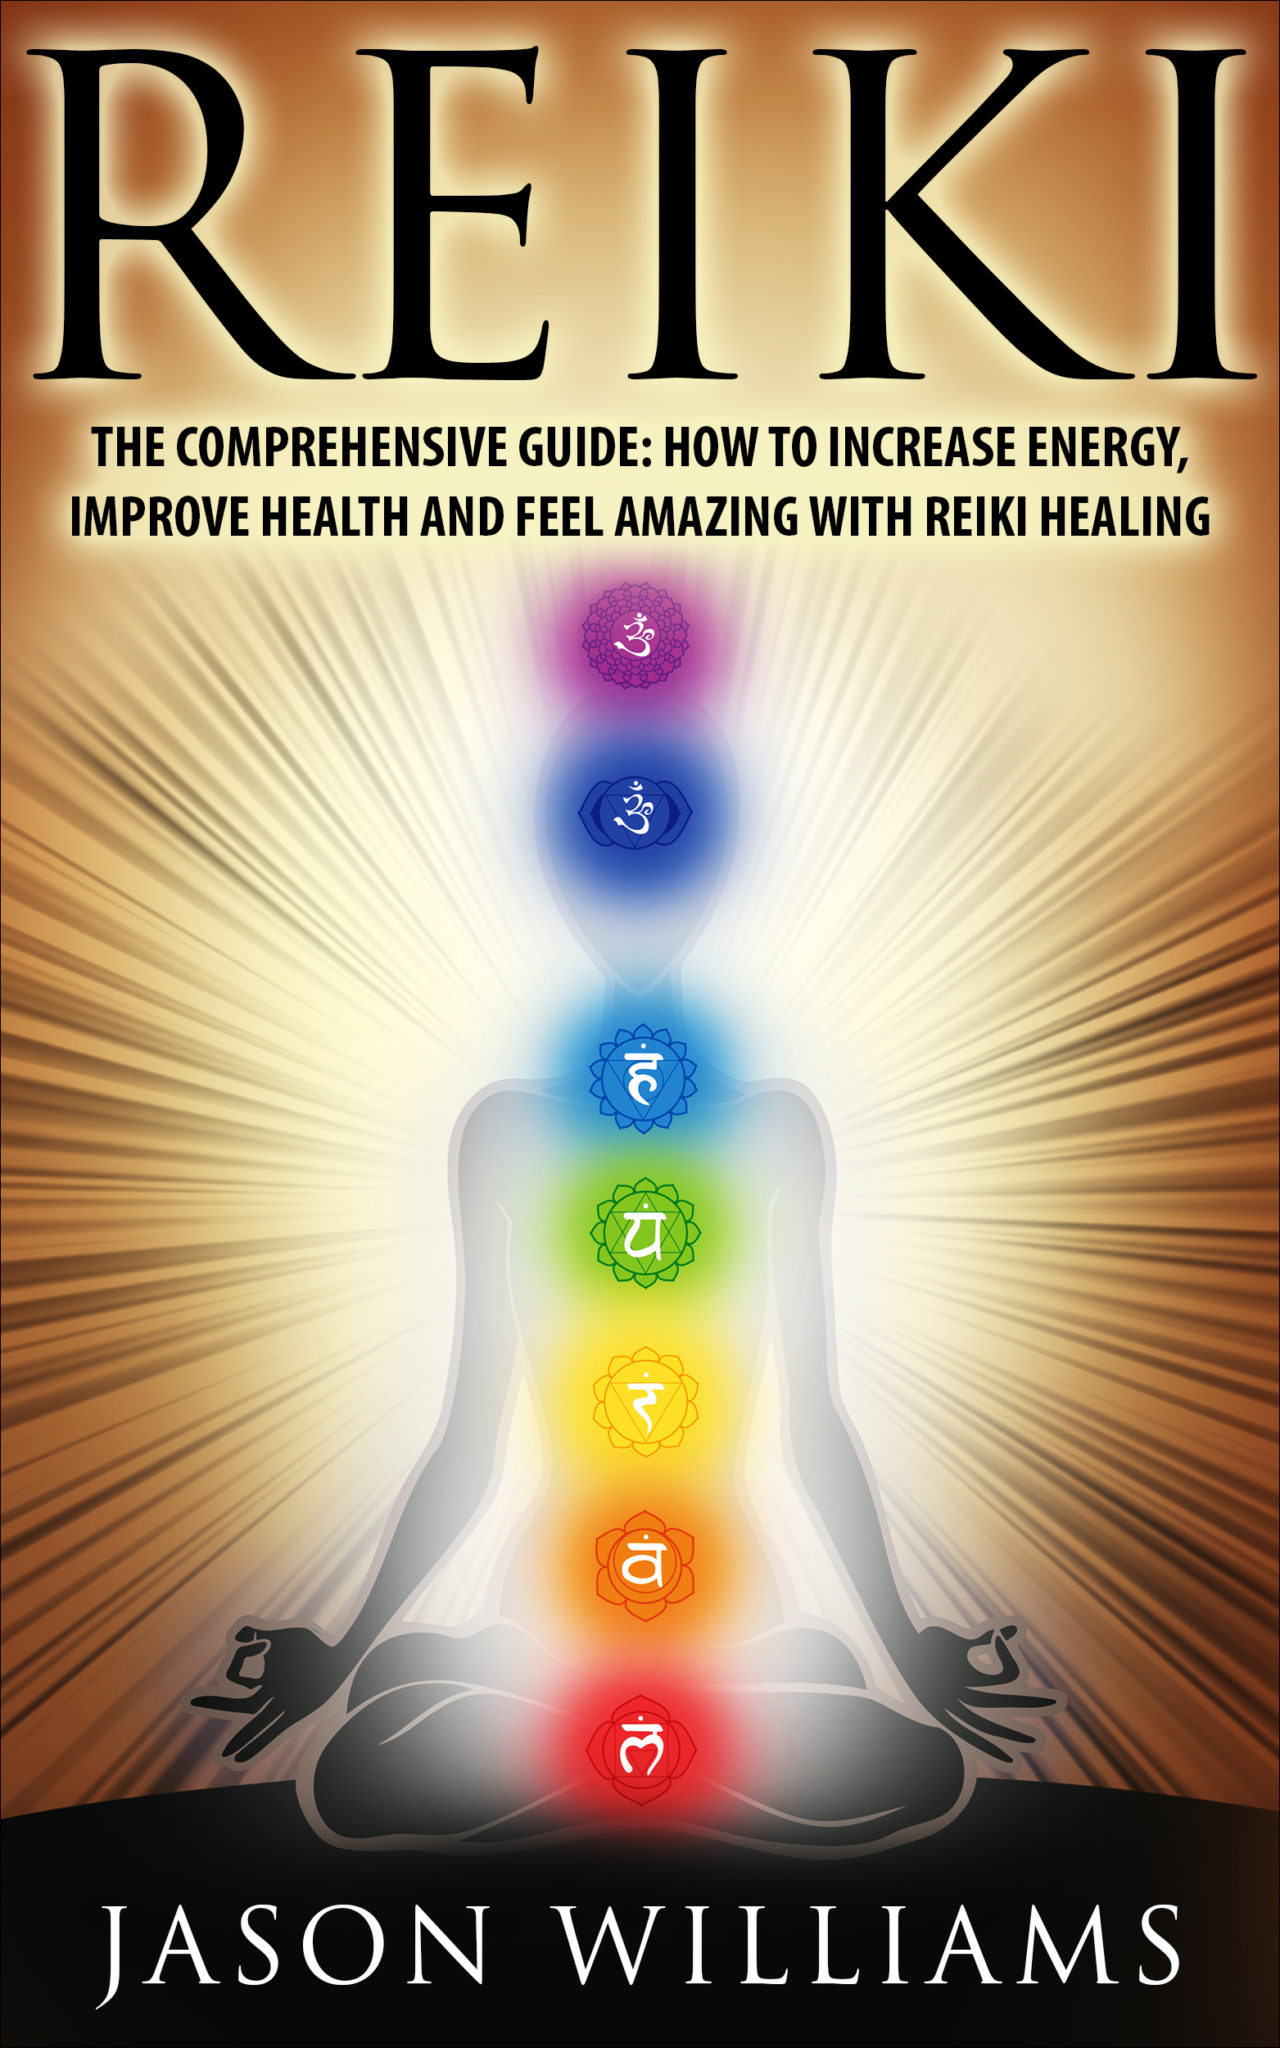 FREE: Reiki: The Comprehensive Guide – How to Increase Energy, Improve Health, and Feel Amazing with Reiki Healing by Jason Williams